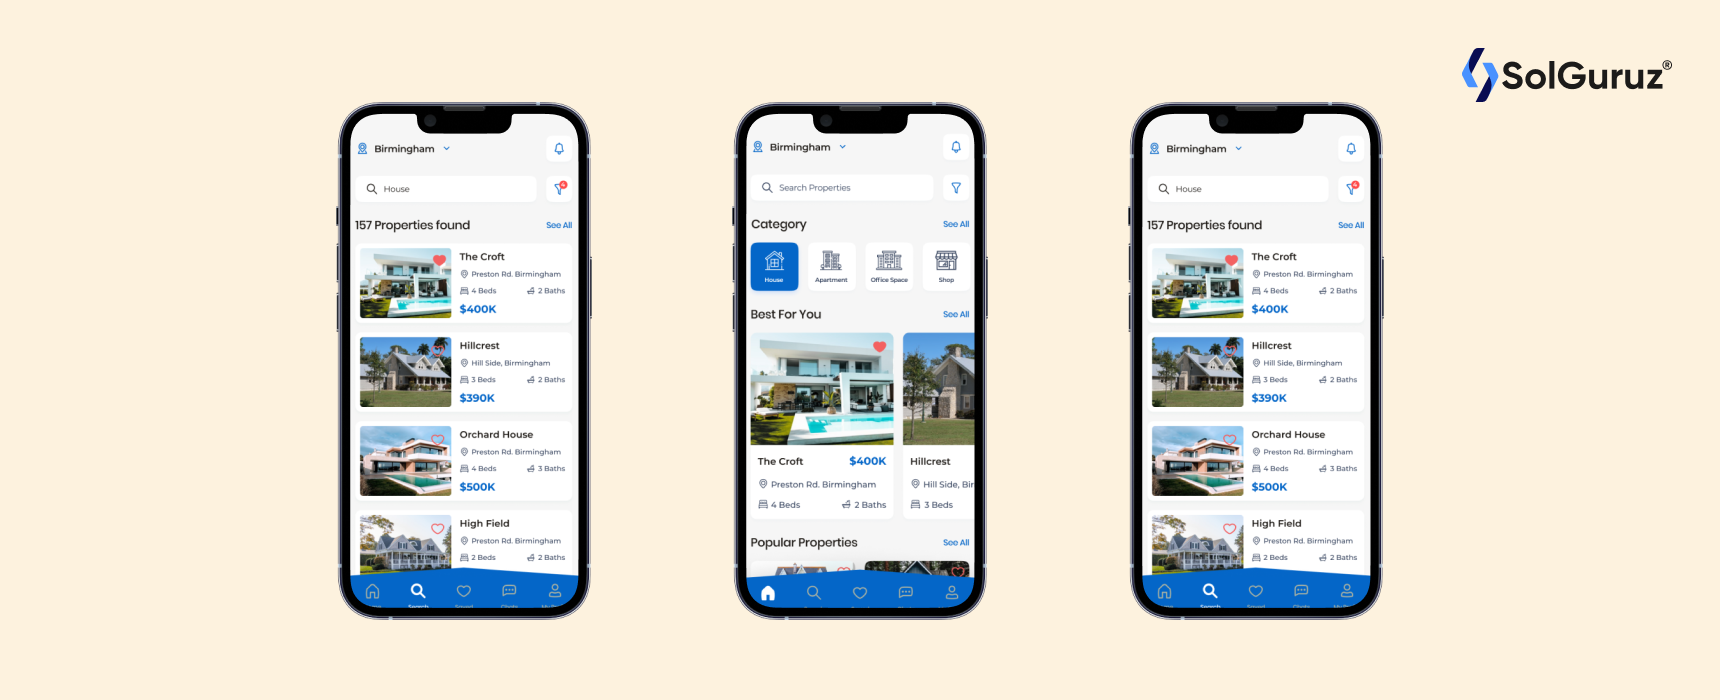 To help your clients find the right property, you must include a feature that makes browsing easier. You can achieve this by adding the filter and categories feature. Your clients will browse the categories and find the properties they want.